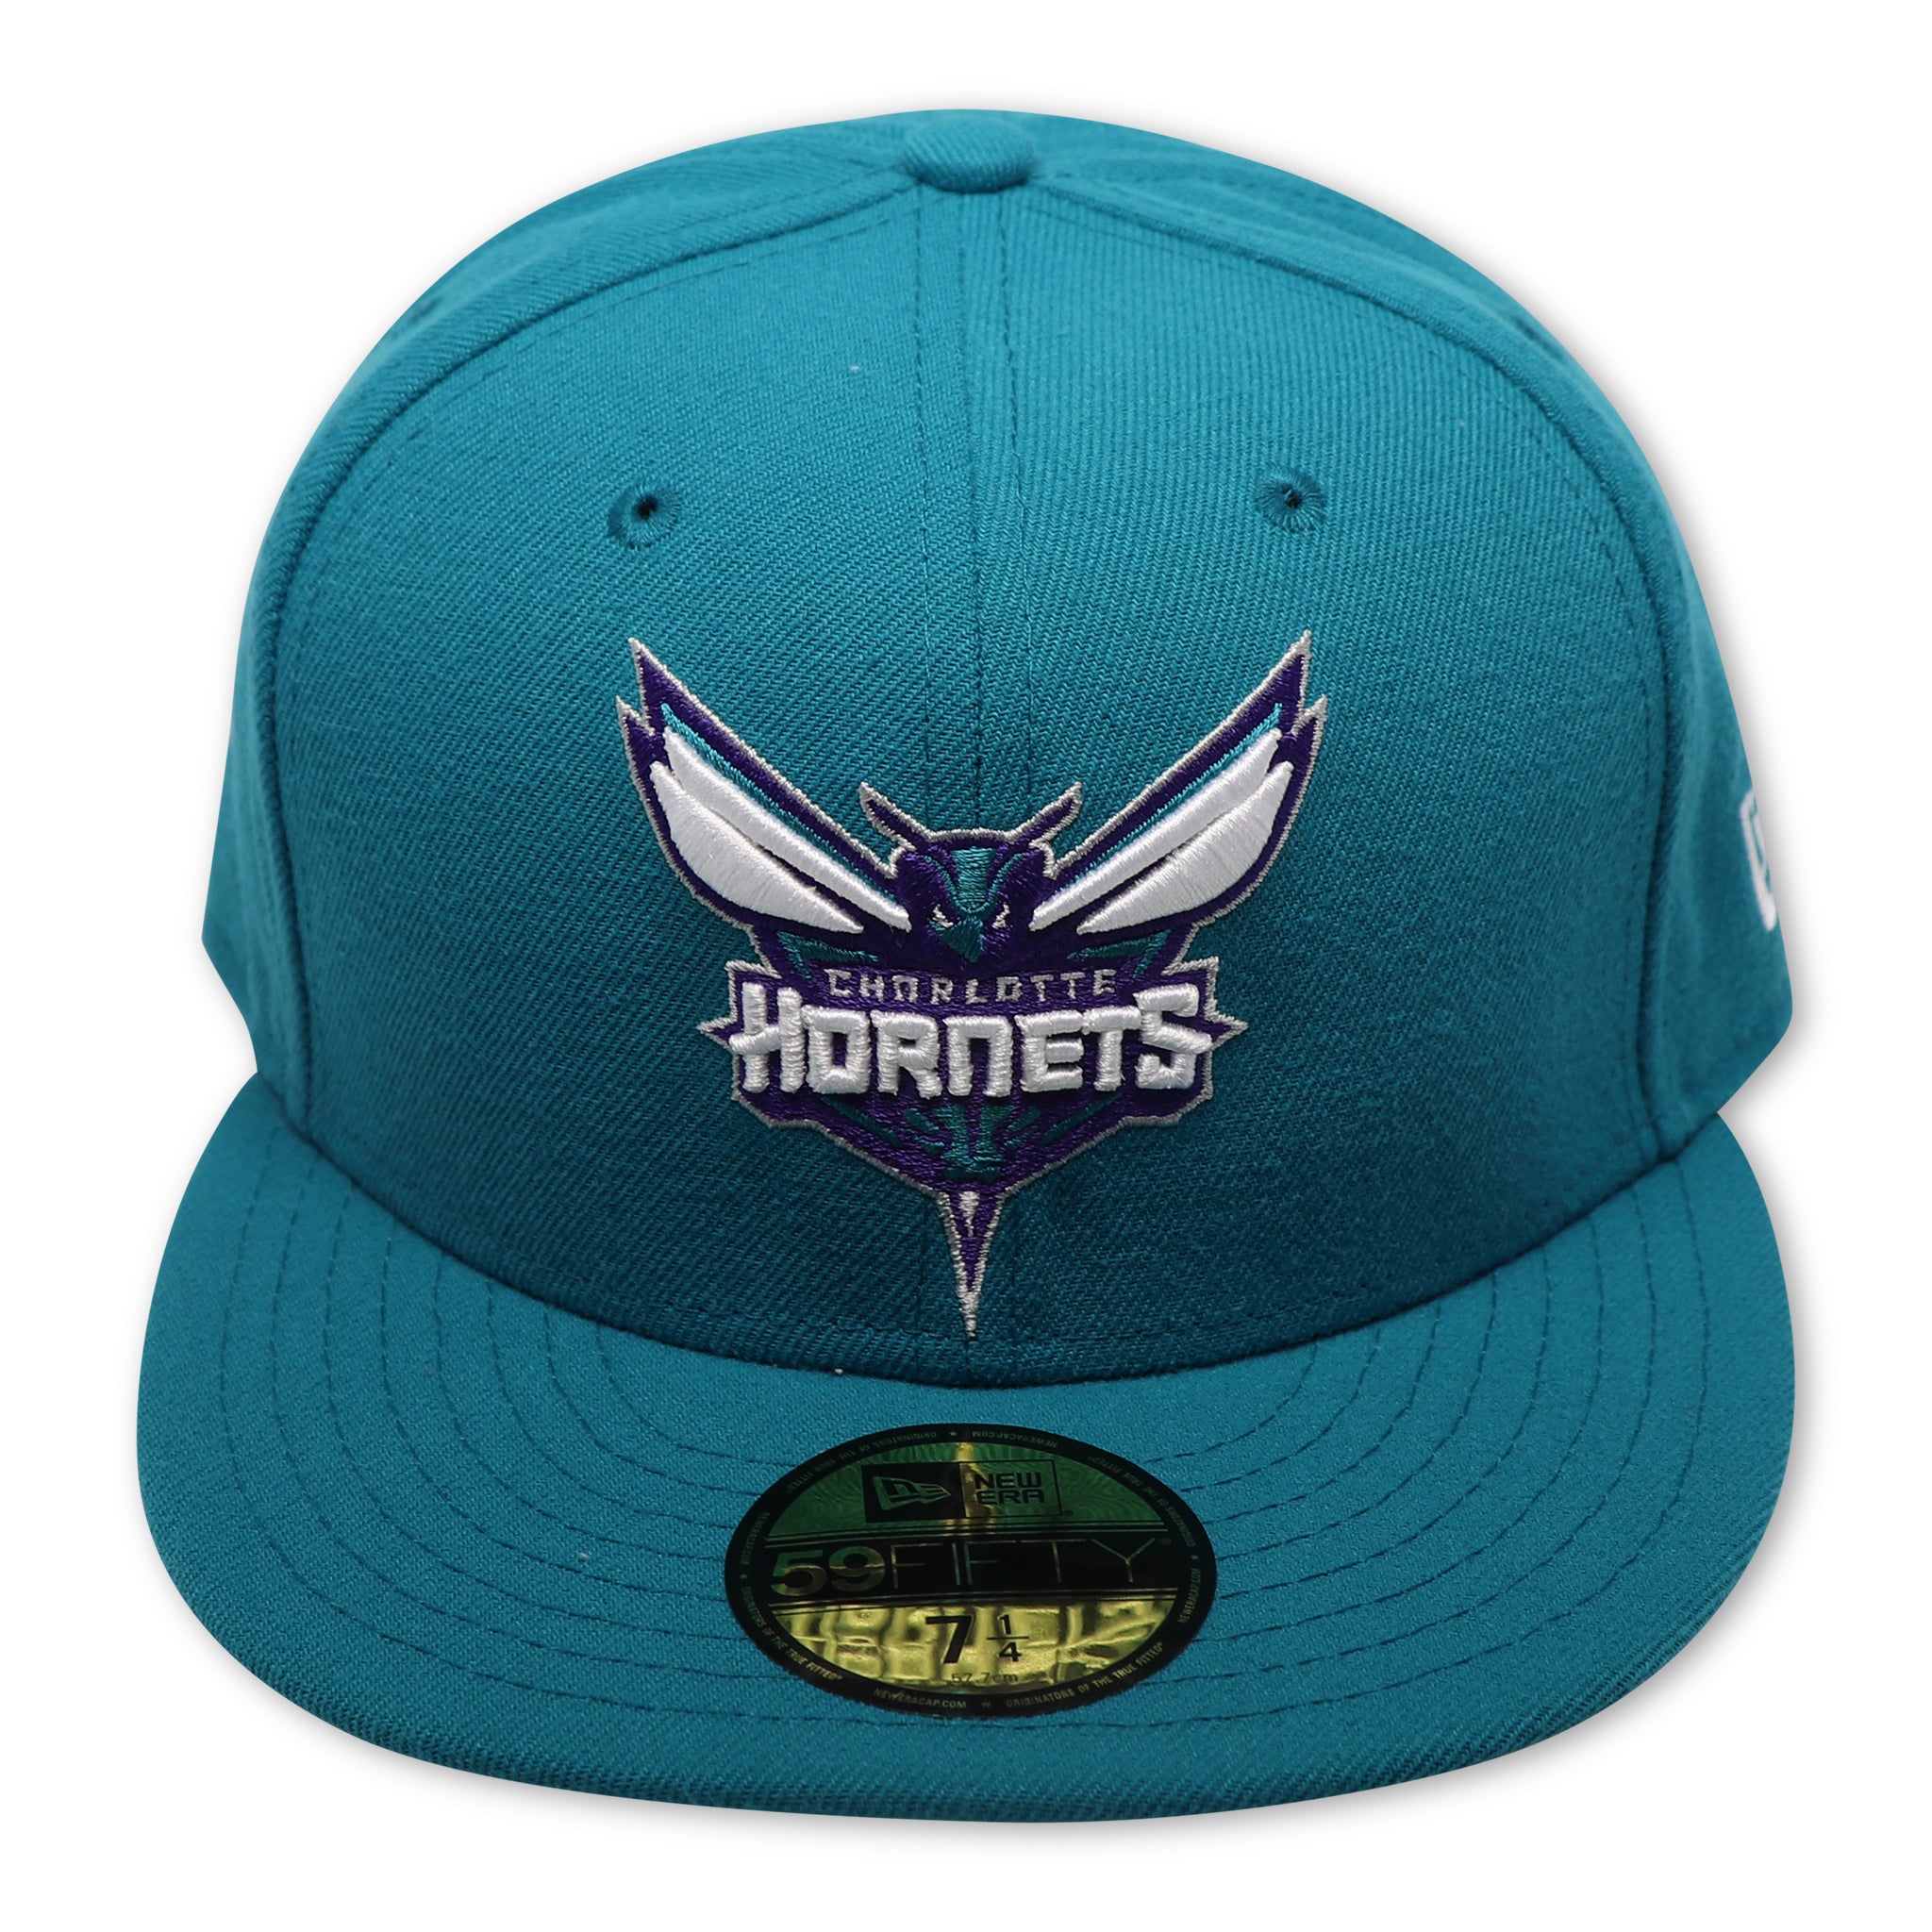 CHARLOTTE HORNETS (TEAL) NEW ERA 59FIFTY FITTED